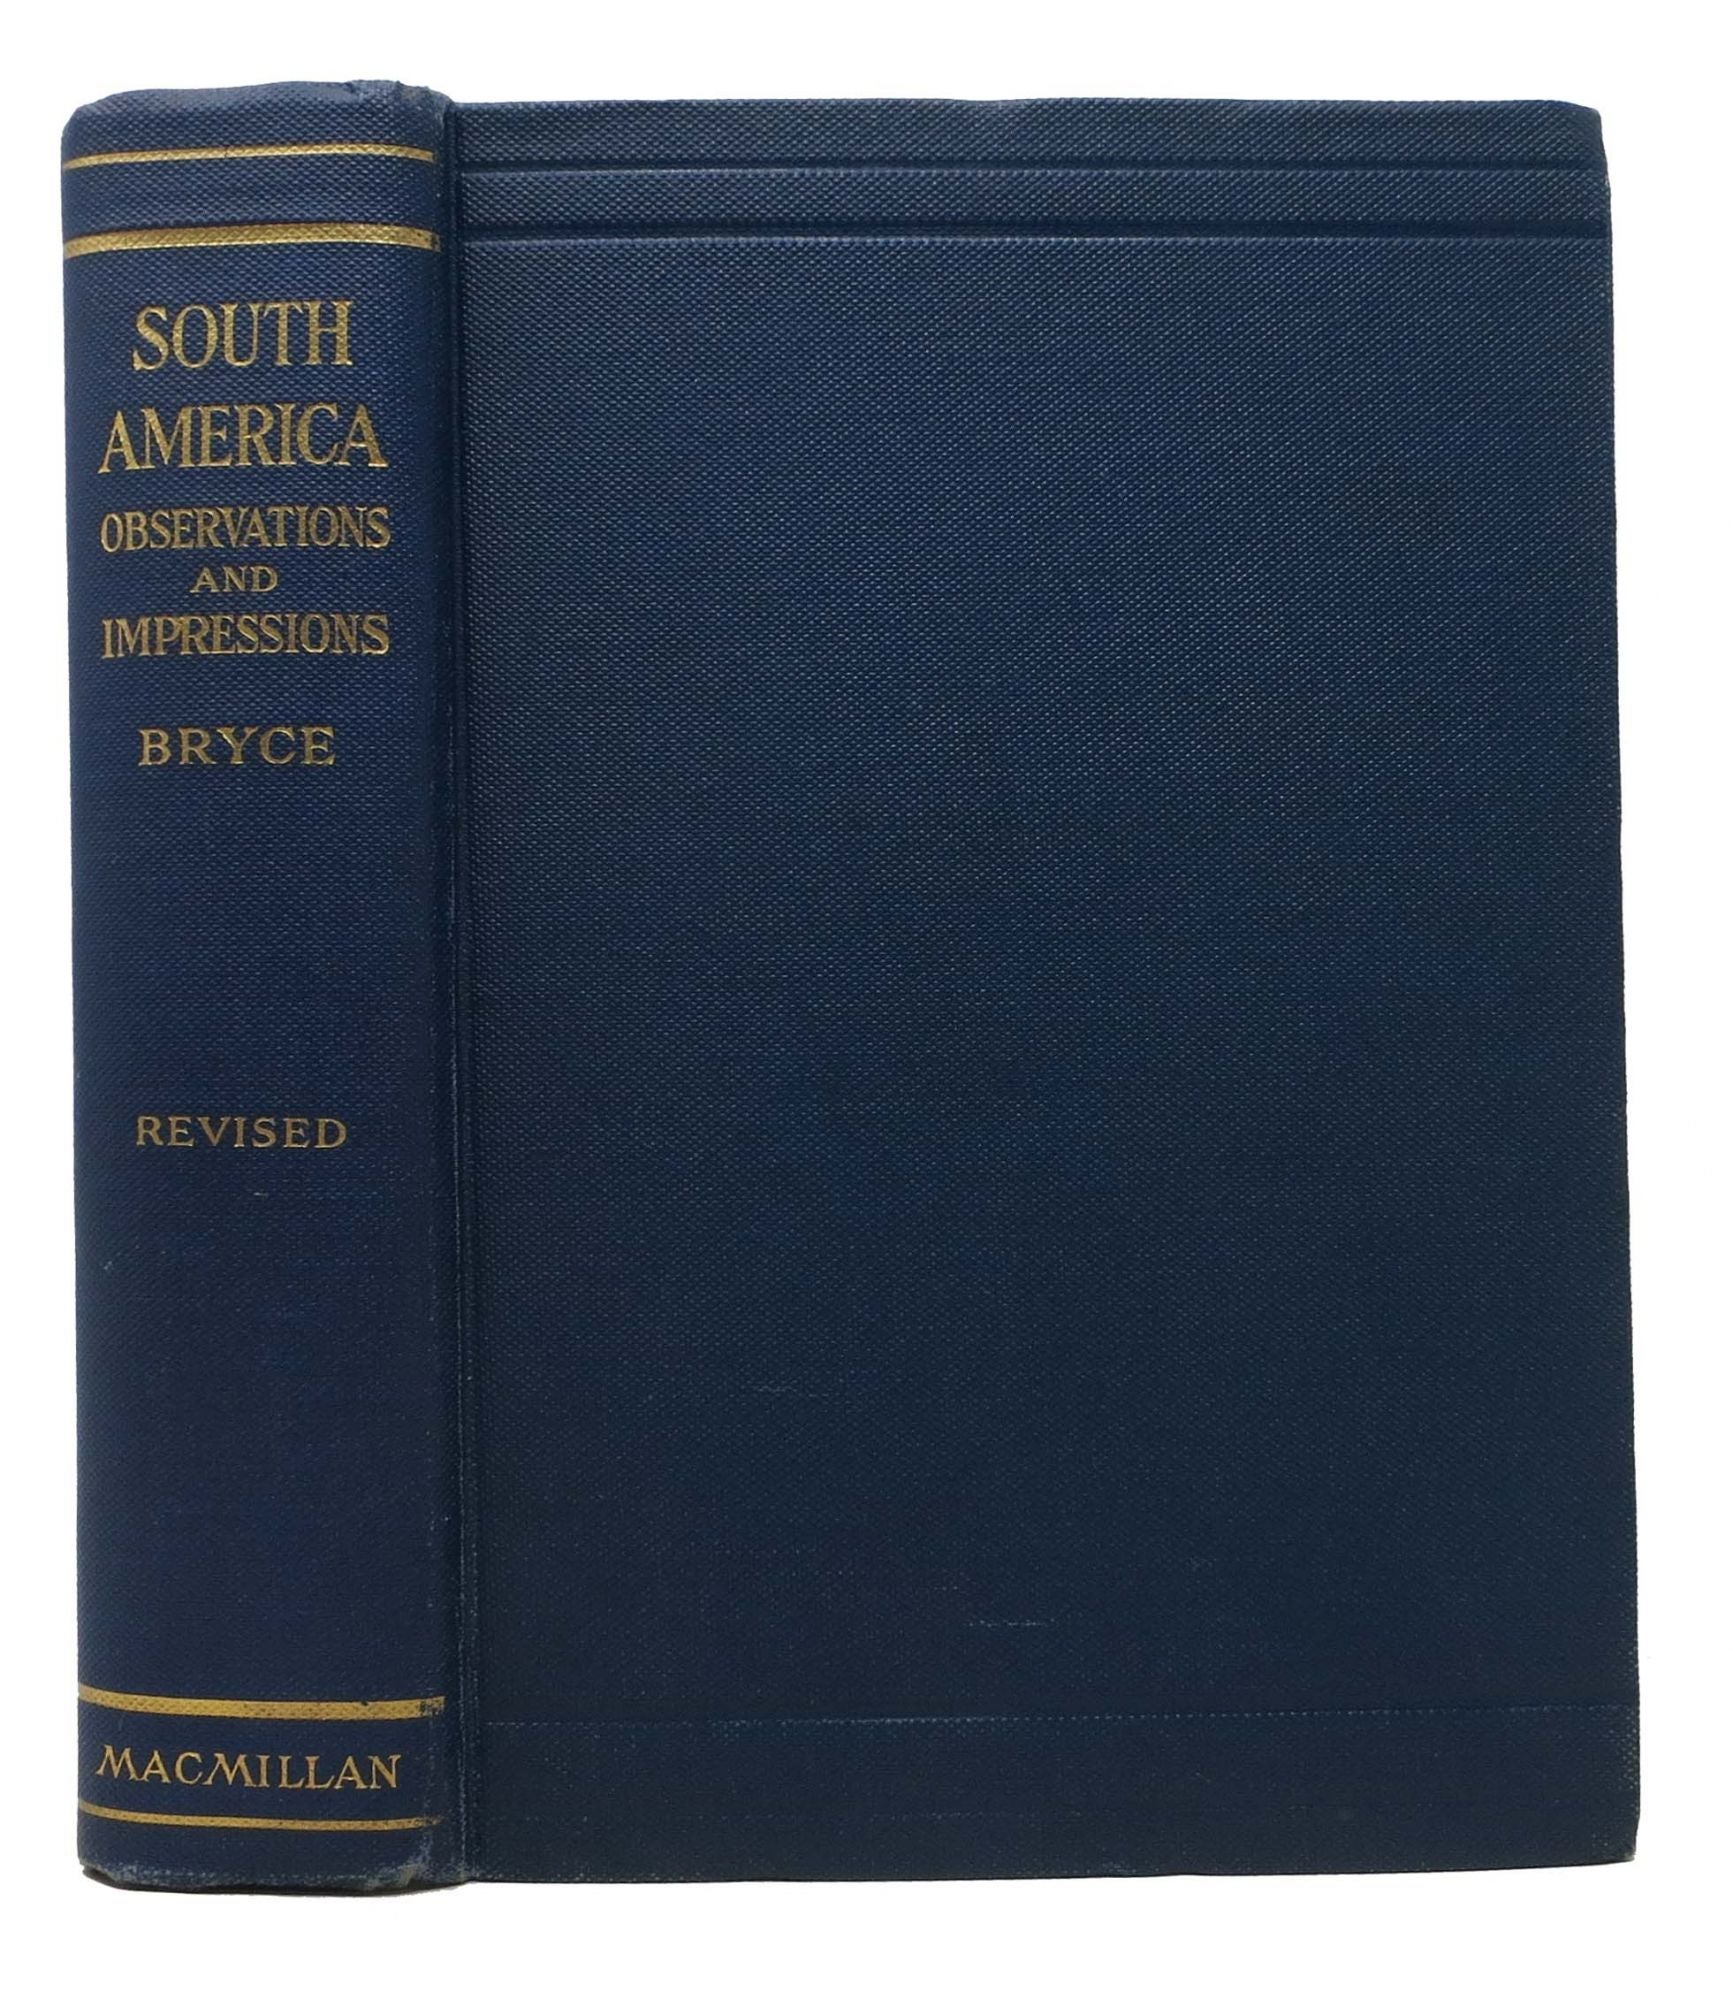 Bryce, James - SOUTH AMERICA. Observations and Impressions